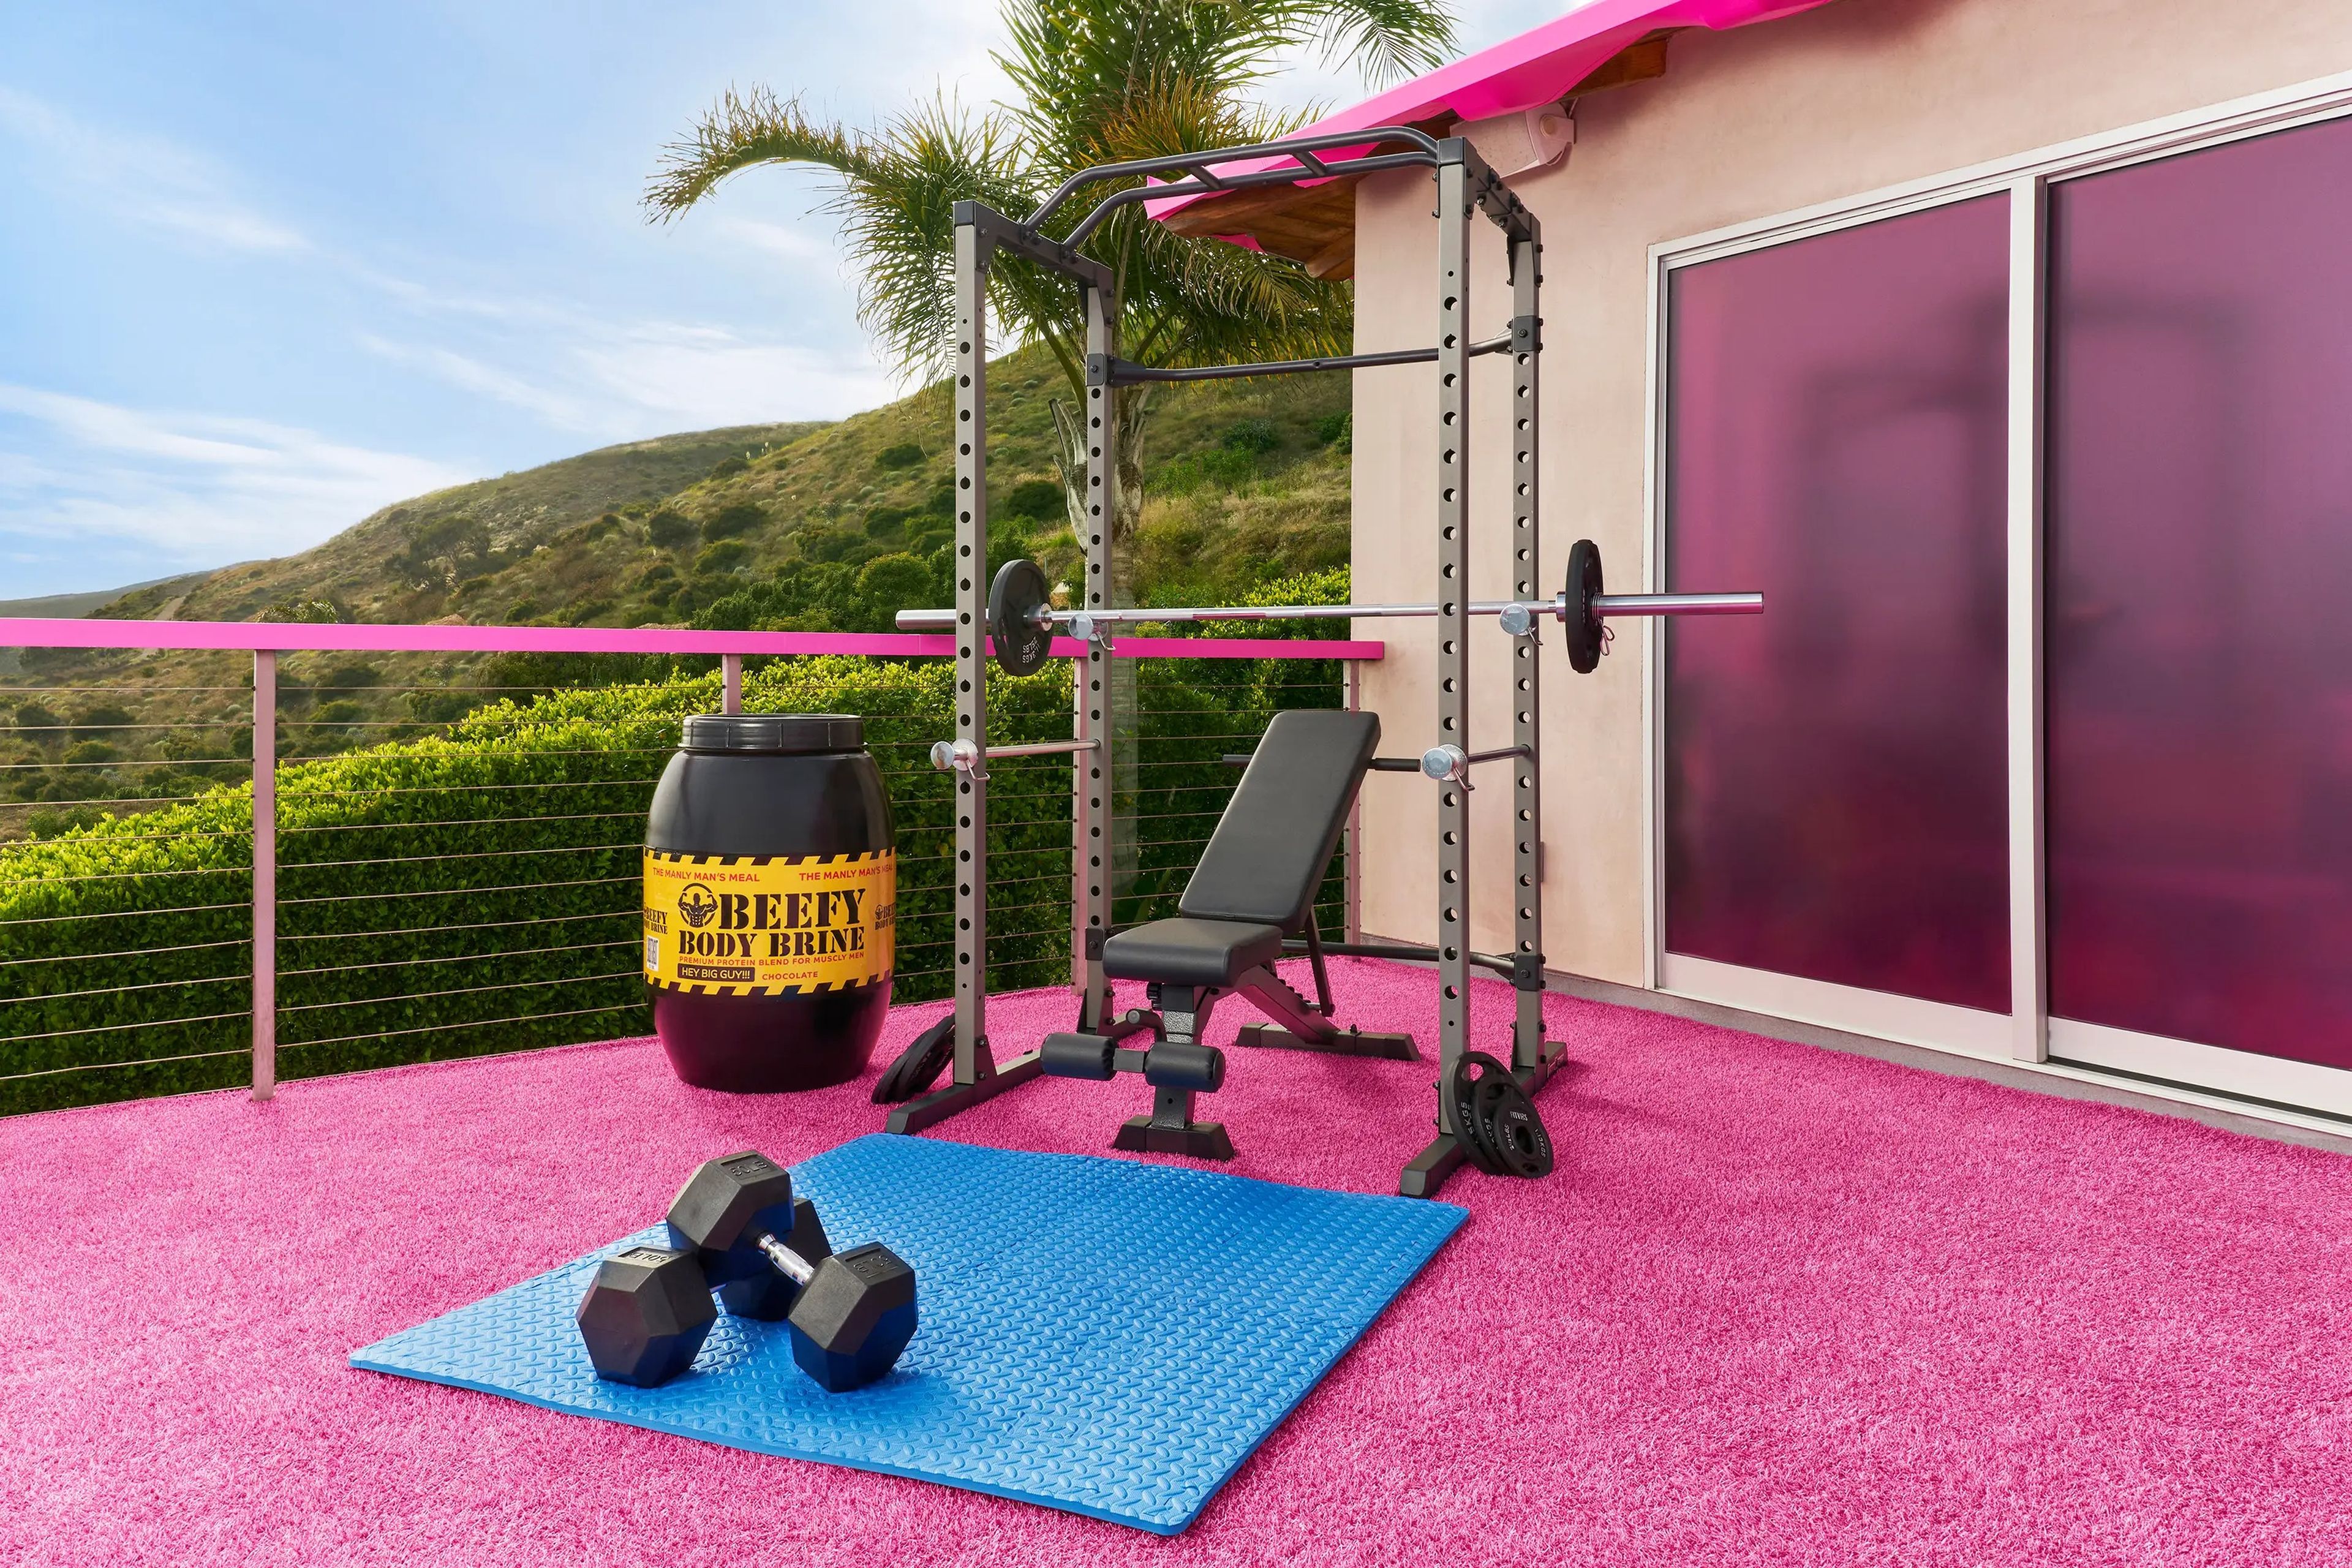 The outdoor gym comes with two sets of weights.